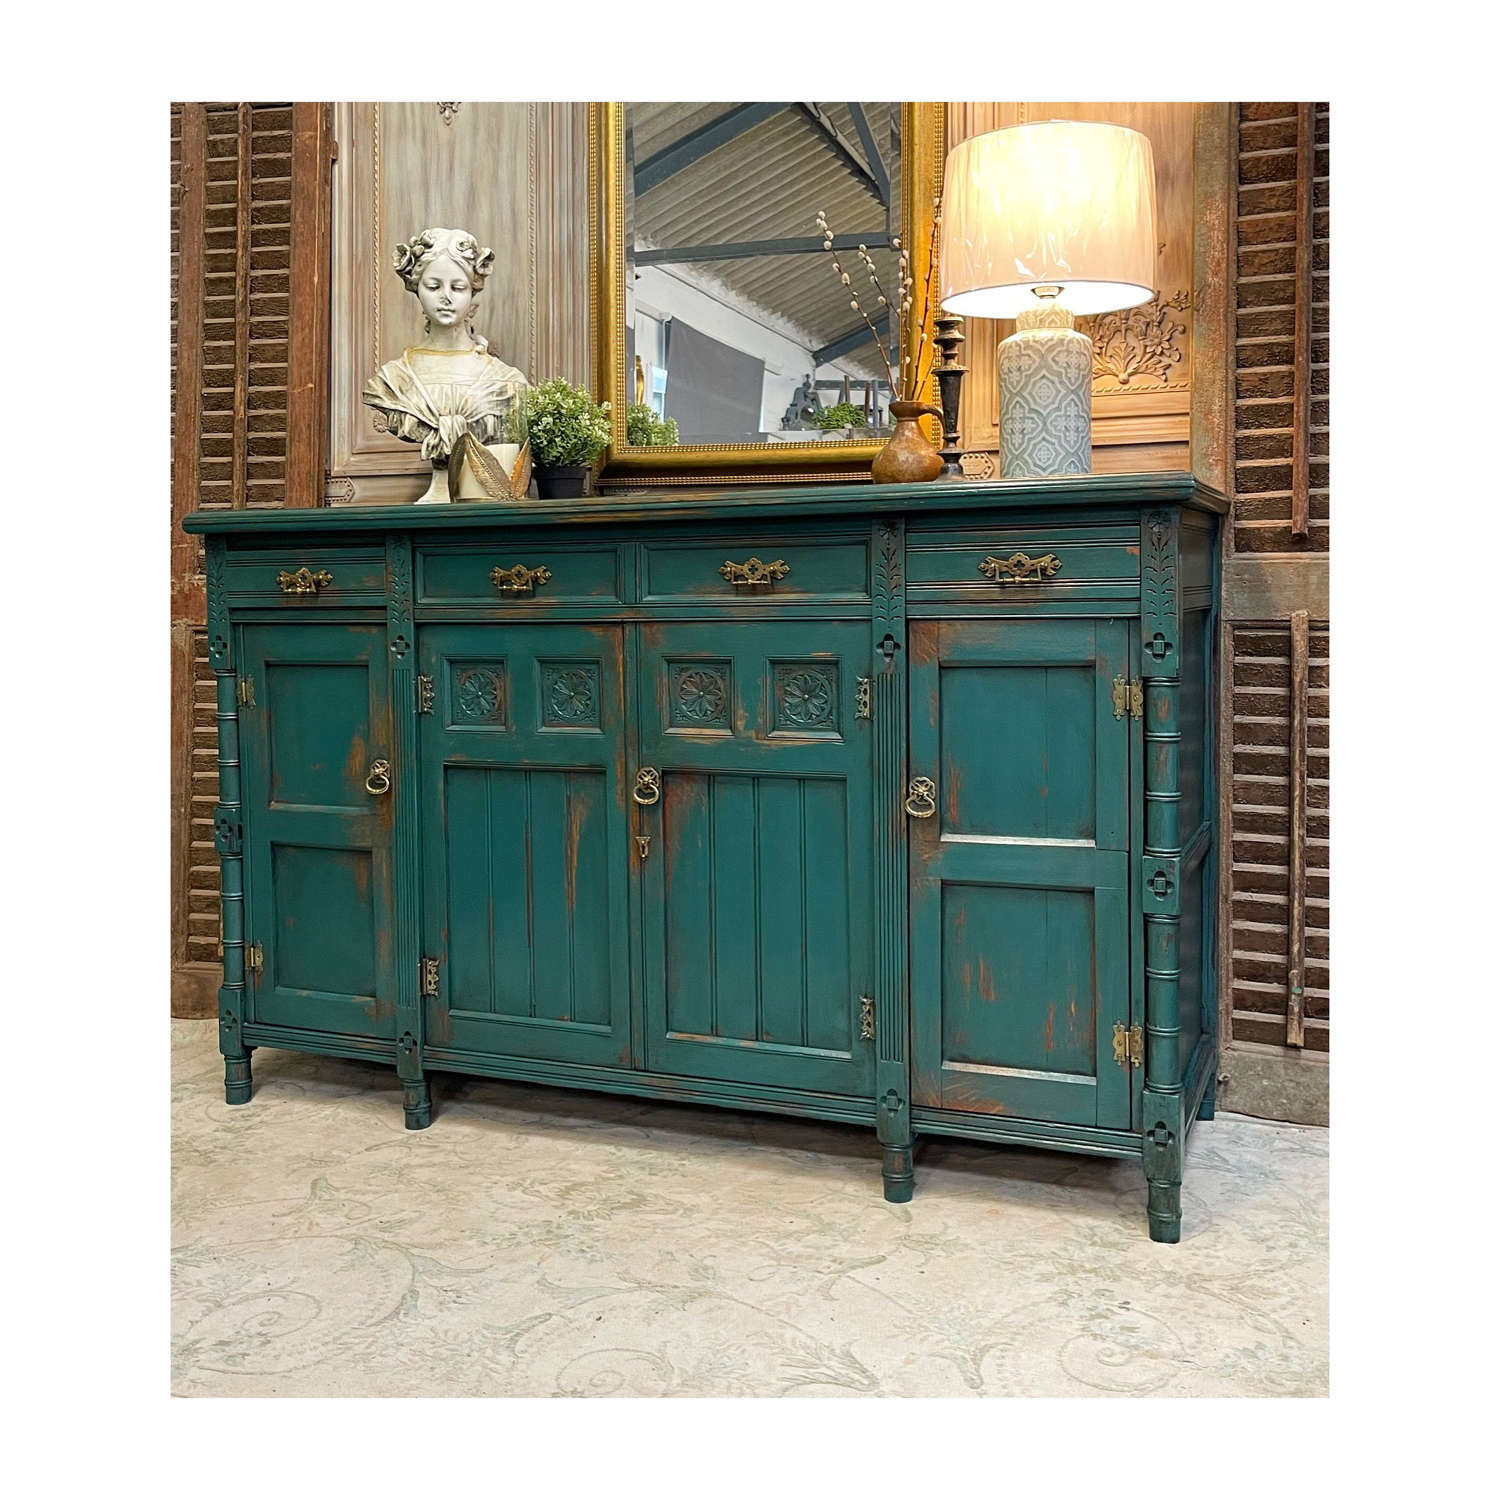 Victorian painted gothic oak sideboard